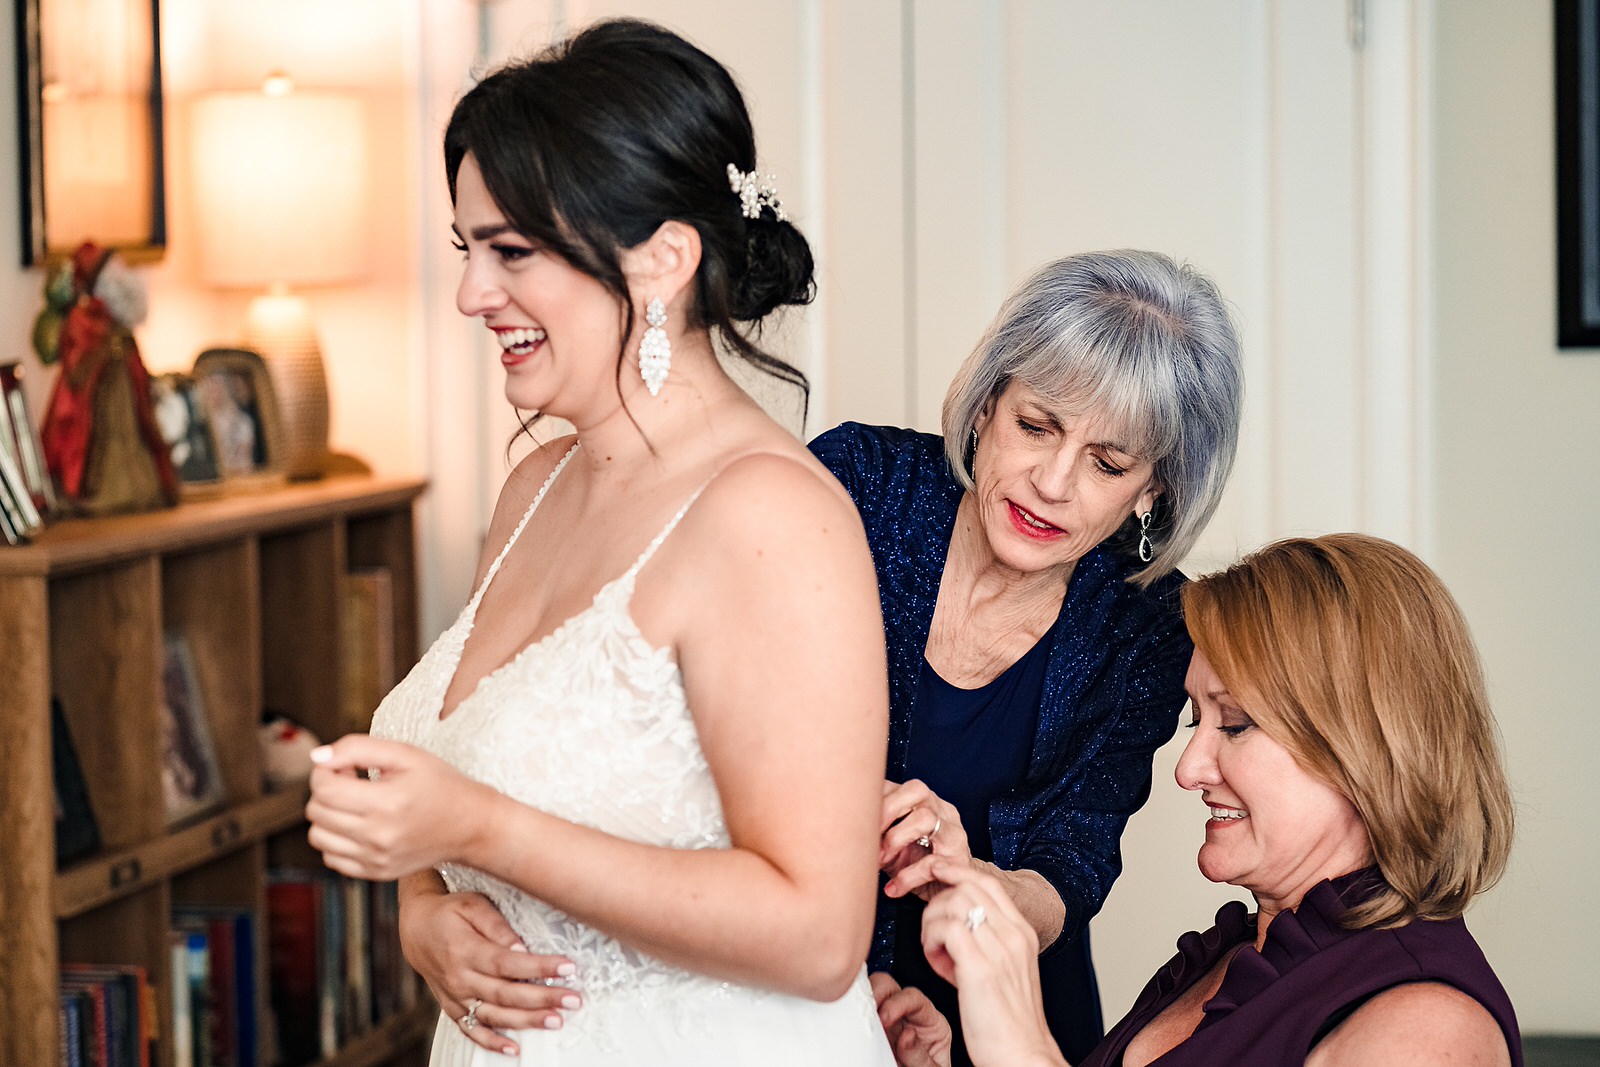 You can include your mom and your stepmom on your wedding day - whatever works for your most important relationships is what you should do